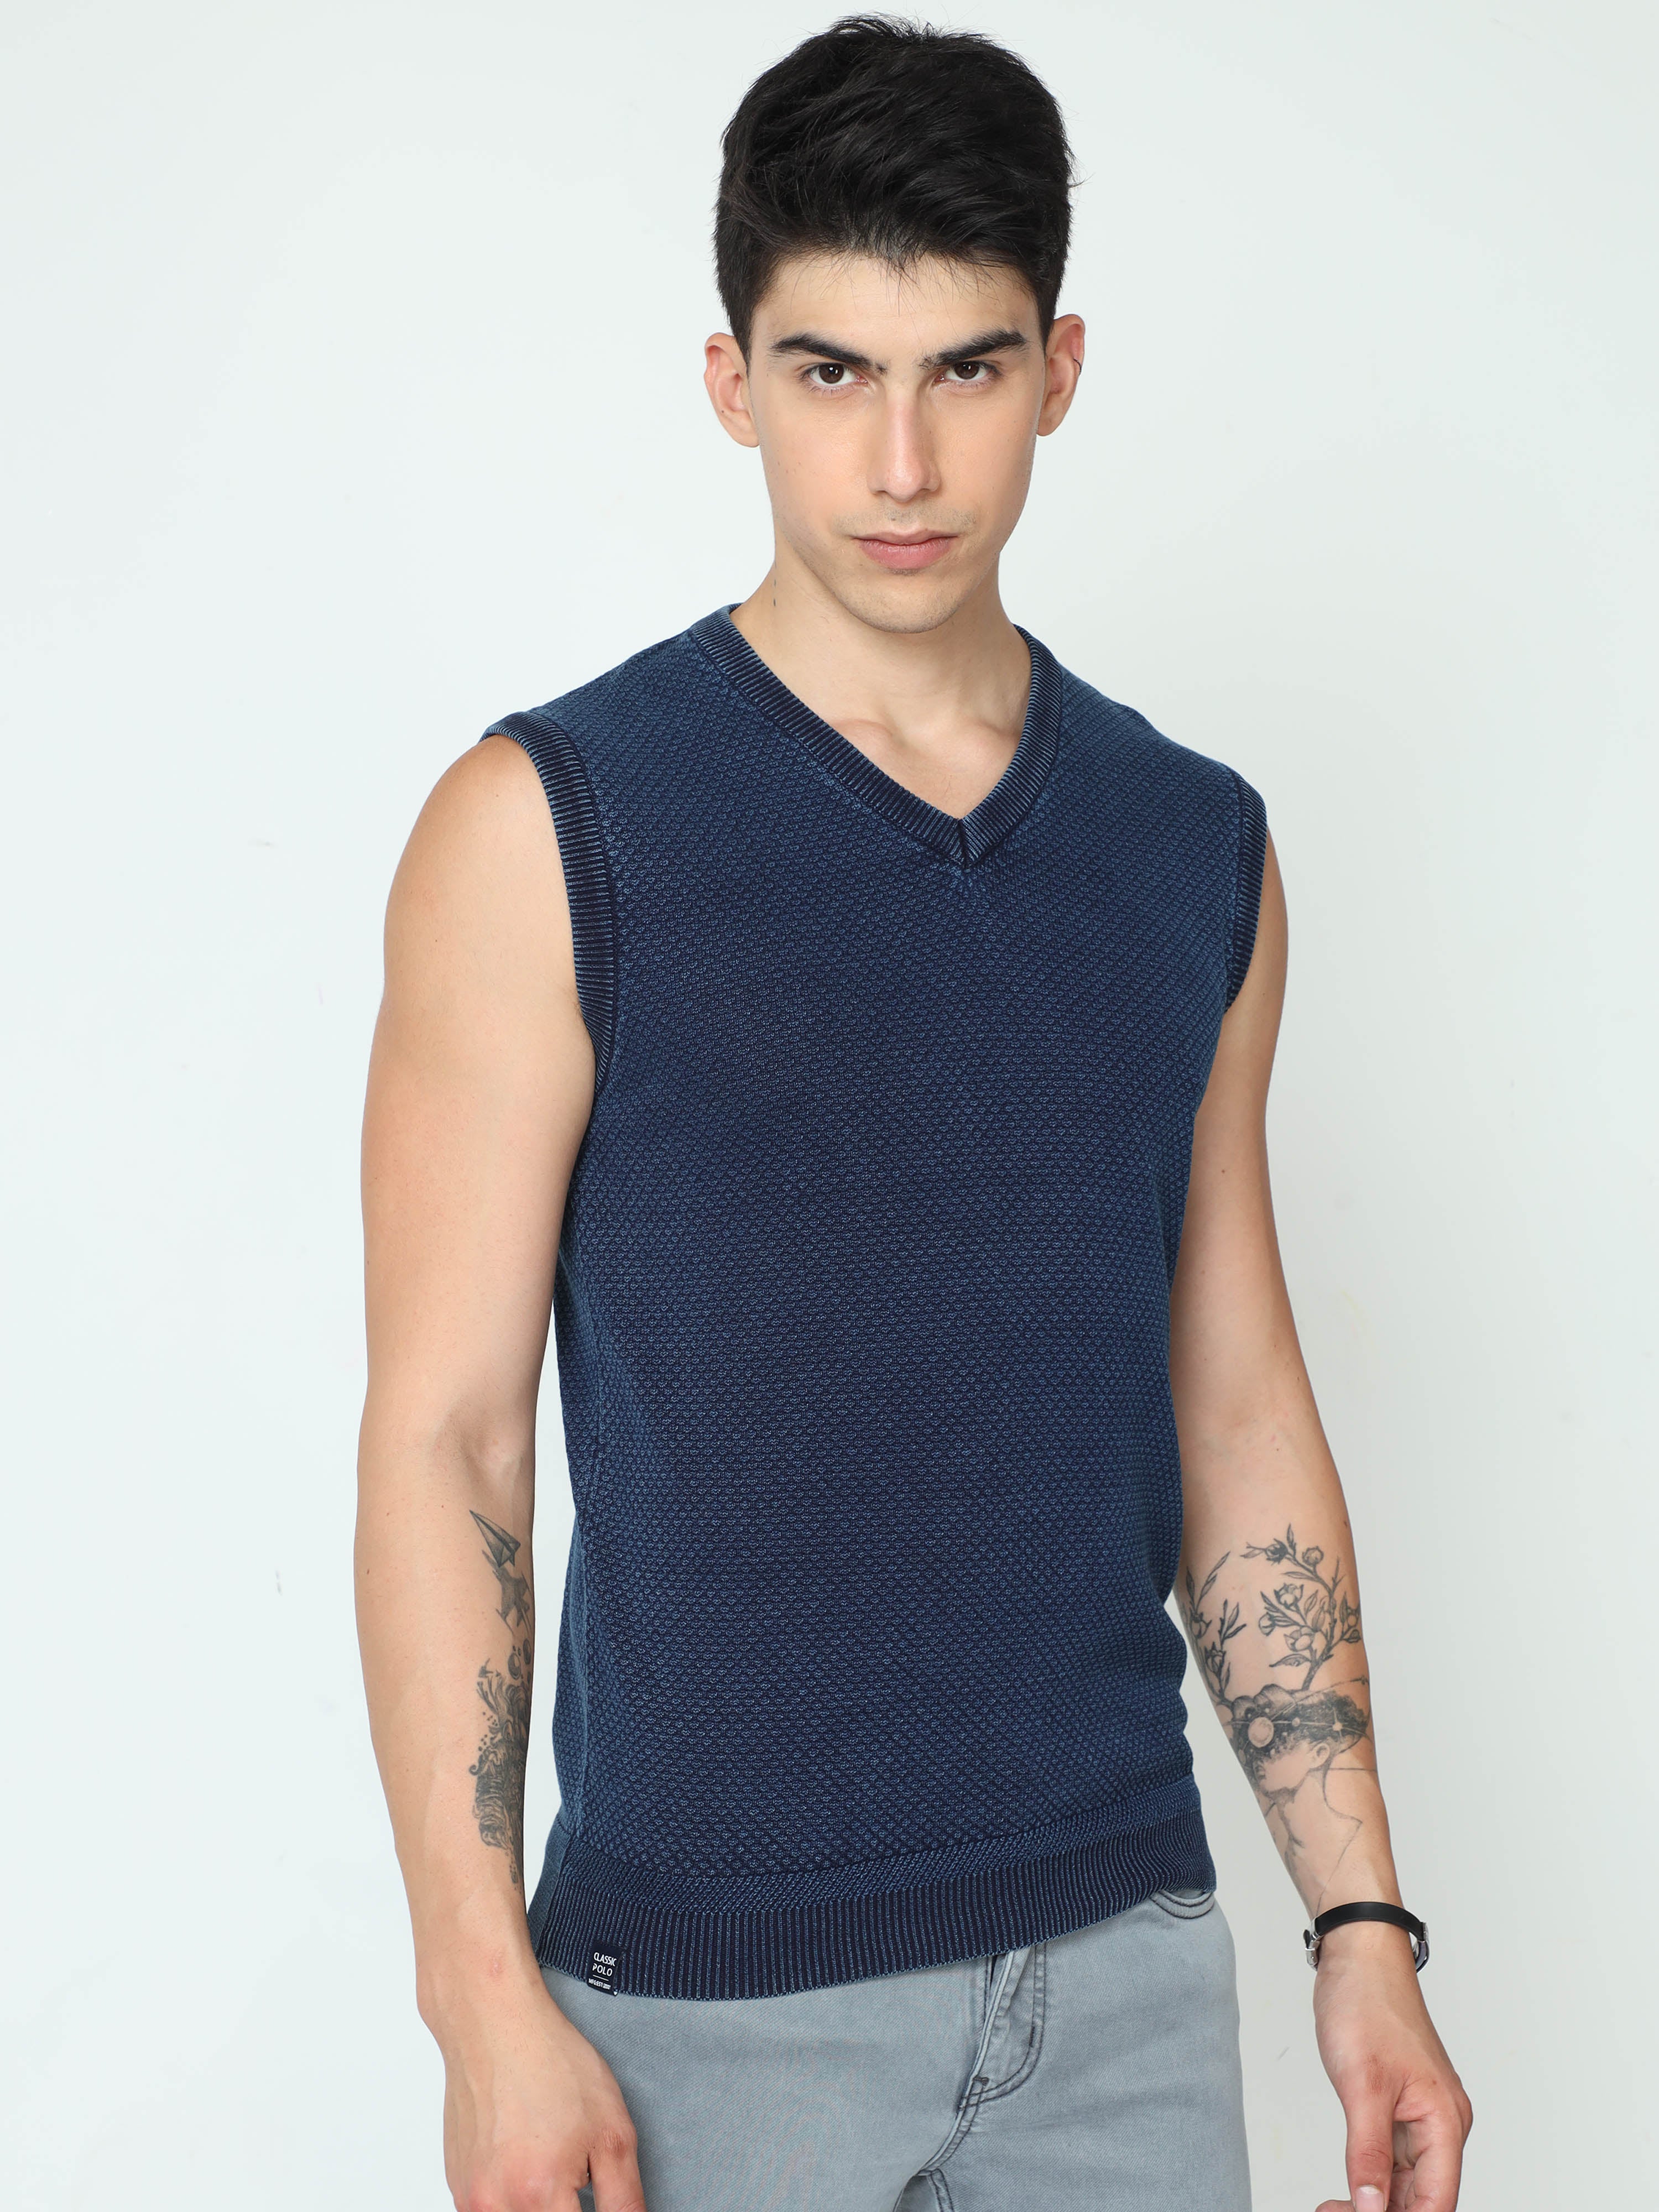 Classic Polo Mens 100% Cotton Navy Solid V Neck Sleeveless Slim Fit Sweater |Cp-Swt-06